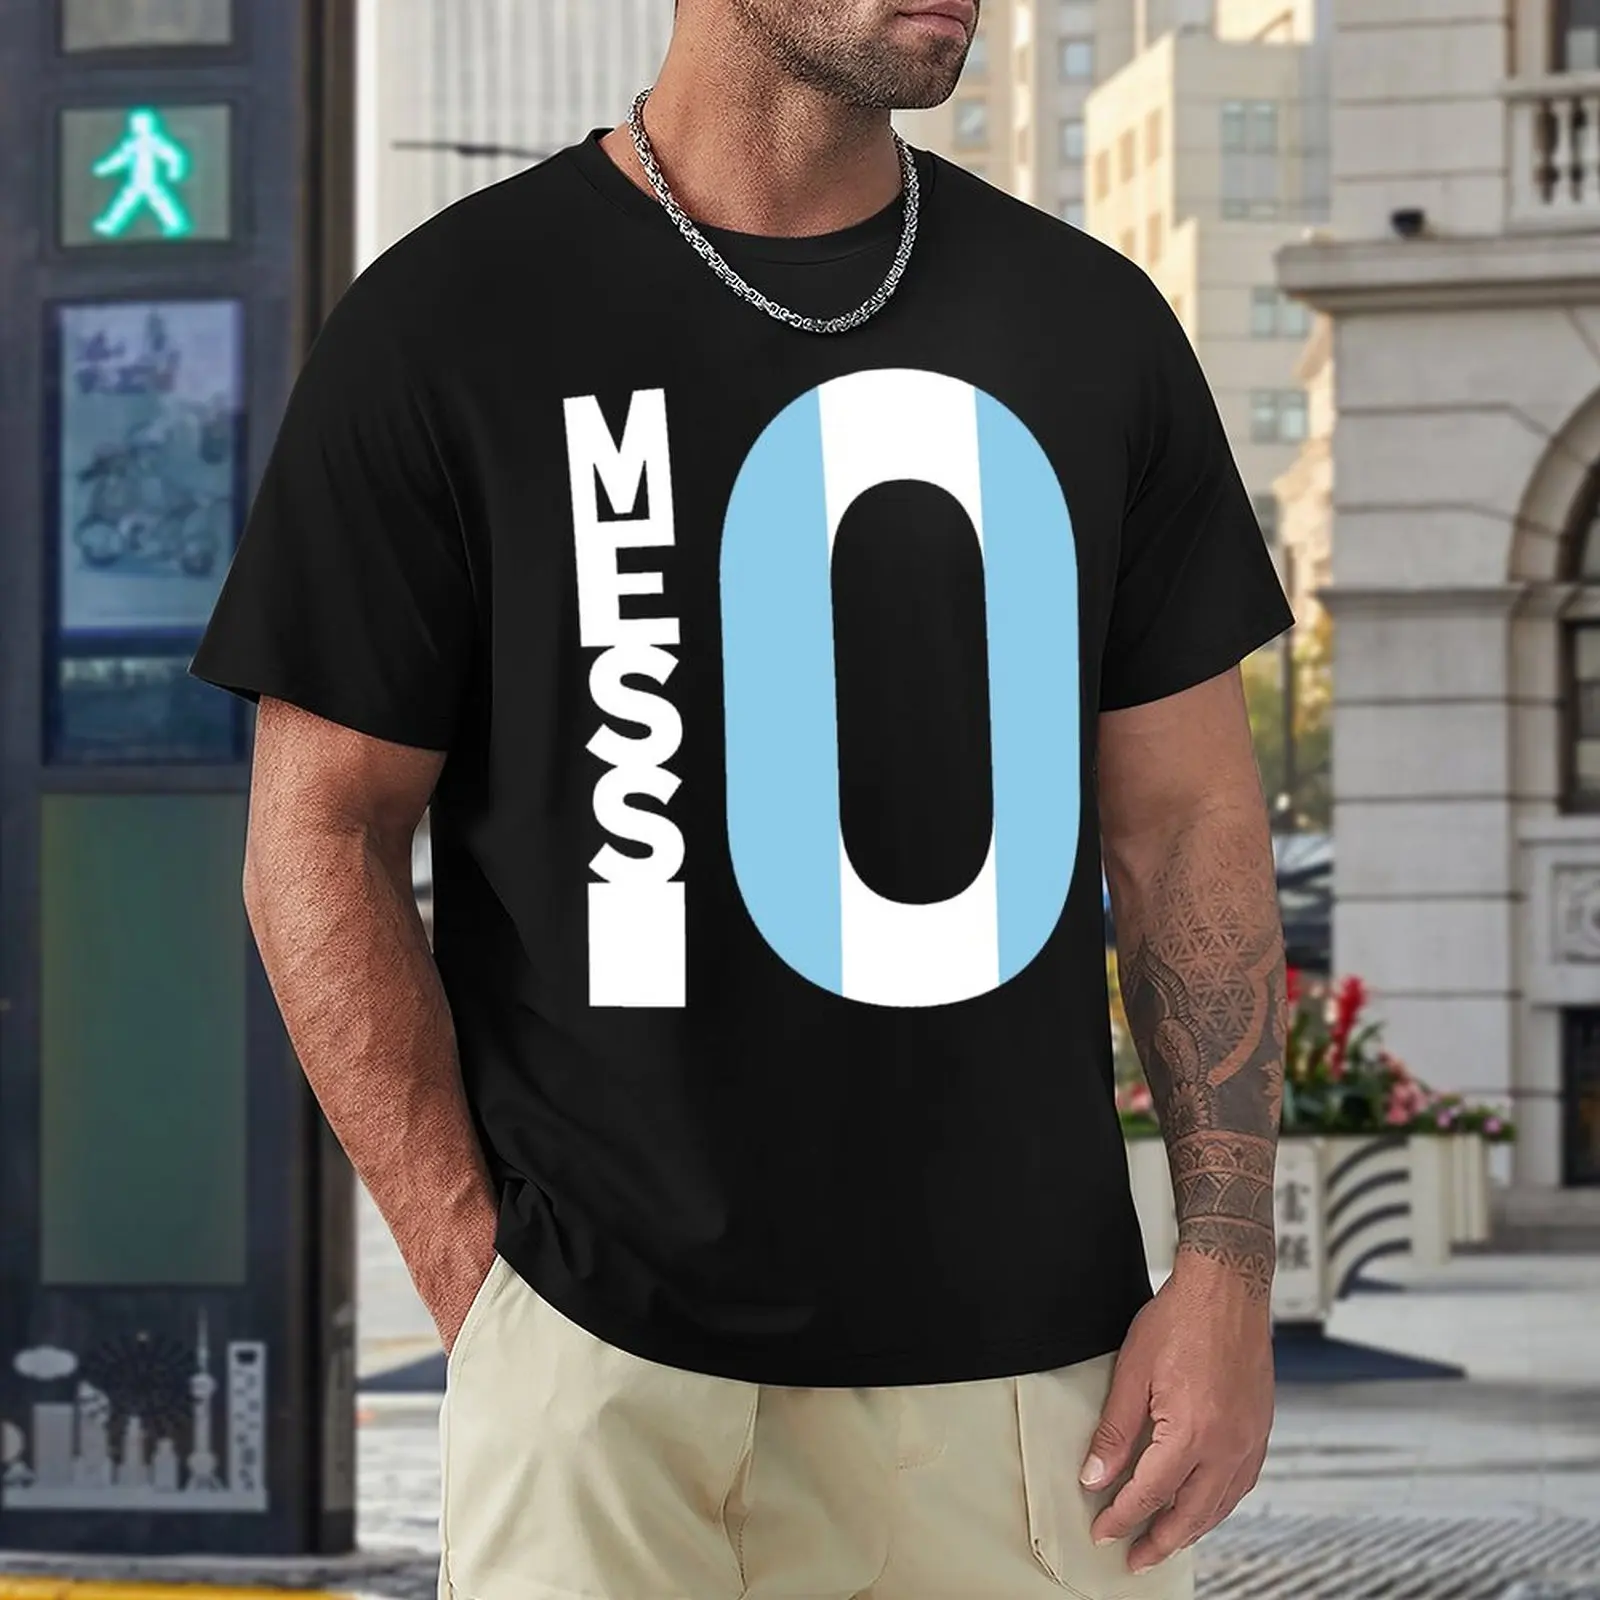 

Kemp Argentina Football Team Lioneler And Messis Soccer Team Motion Novelty High Quality Tees Fitness USA Size